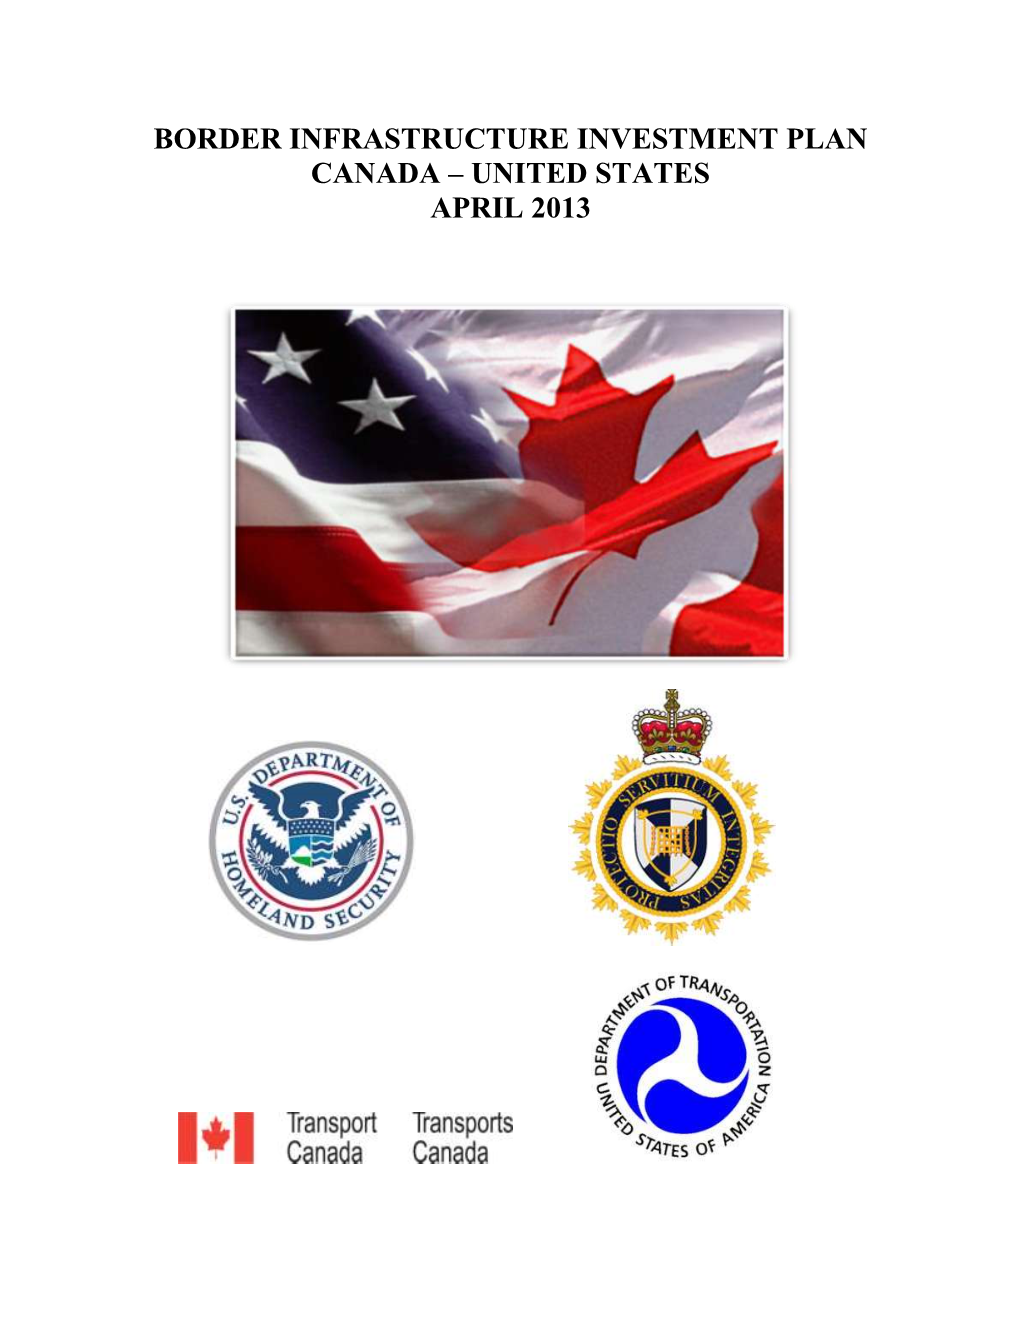 Border Infrastructure Investment Plan Canada – United States April 2013